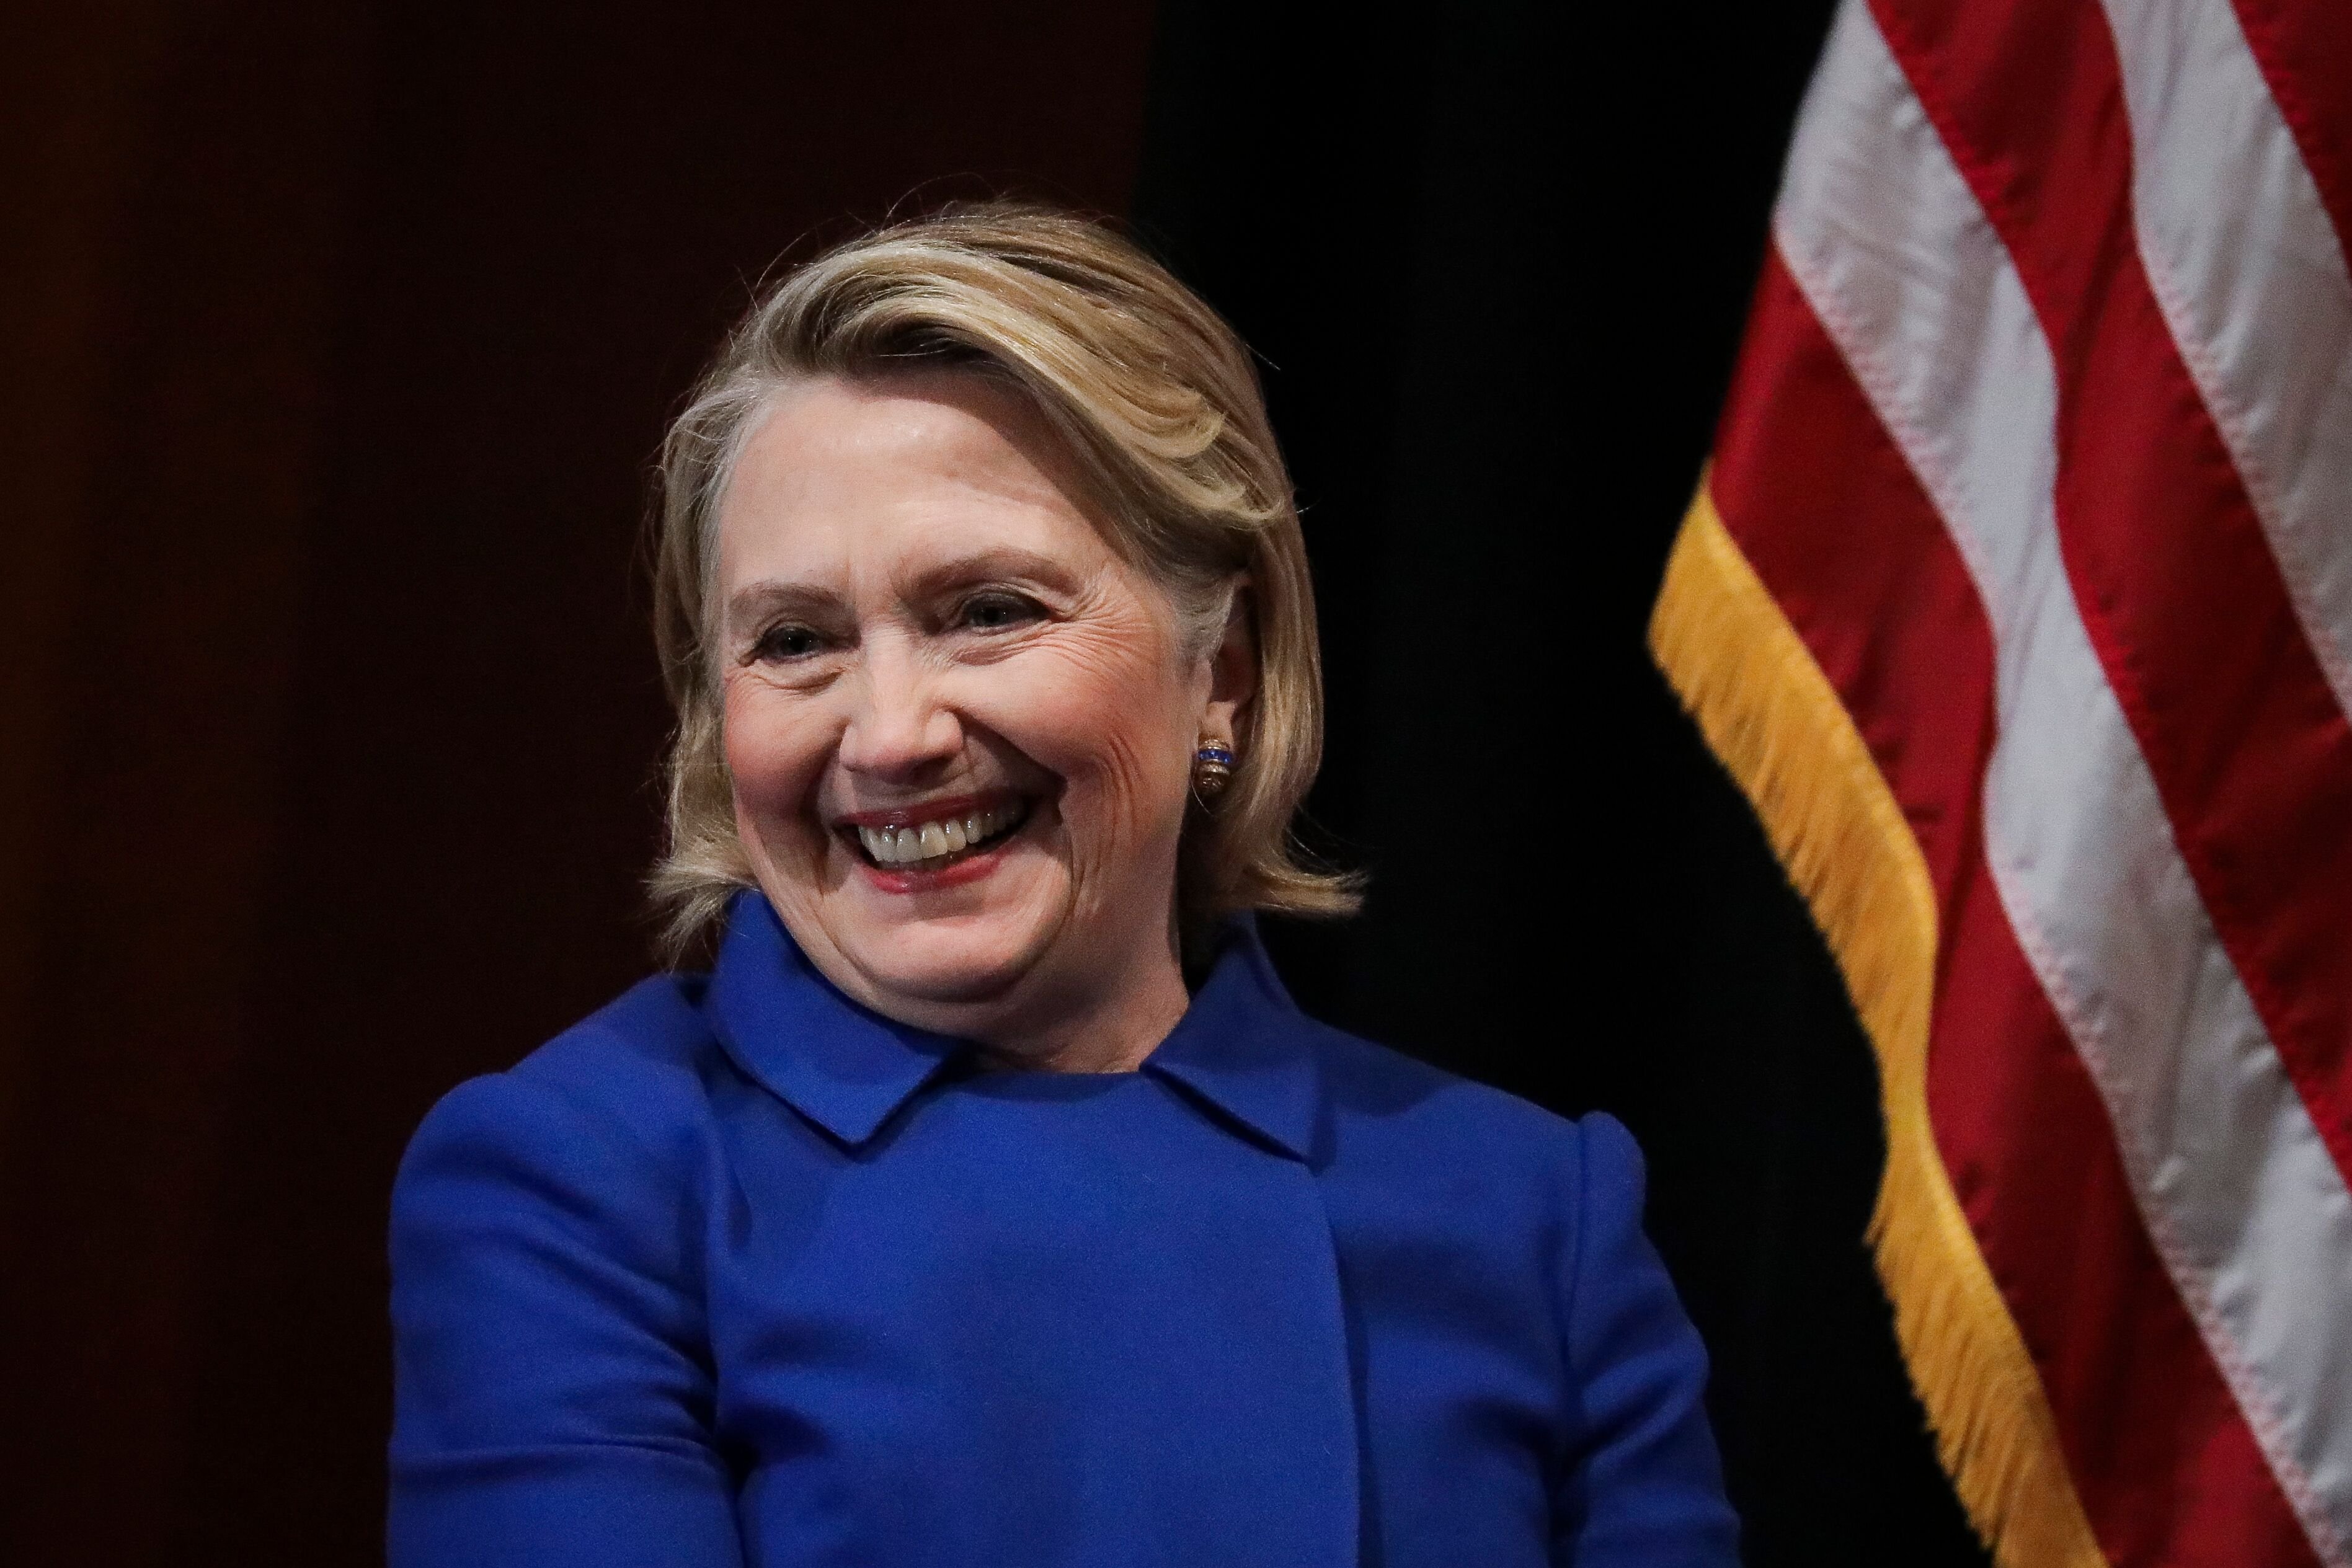 Hillary Clinton at Barnard College on January 7, 2019, in New York City | Photo: Drew Angerer/Getty Images